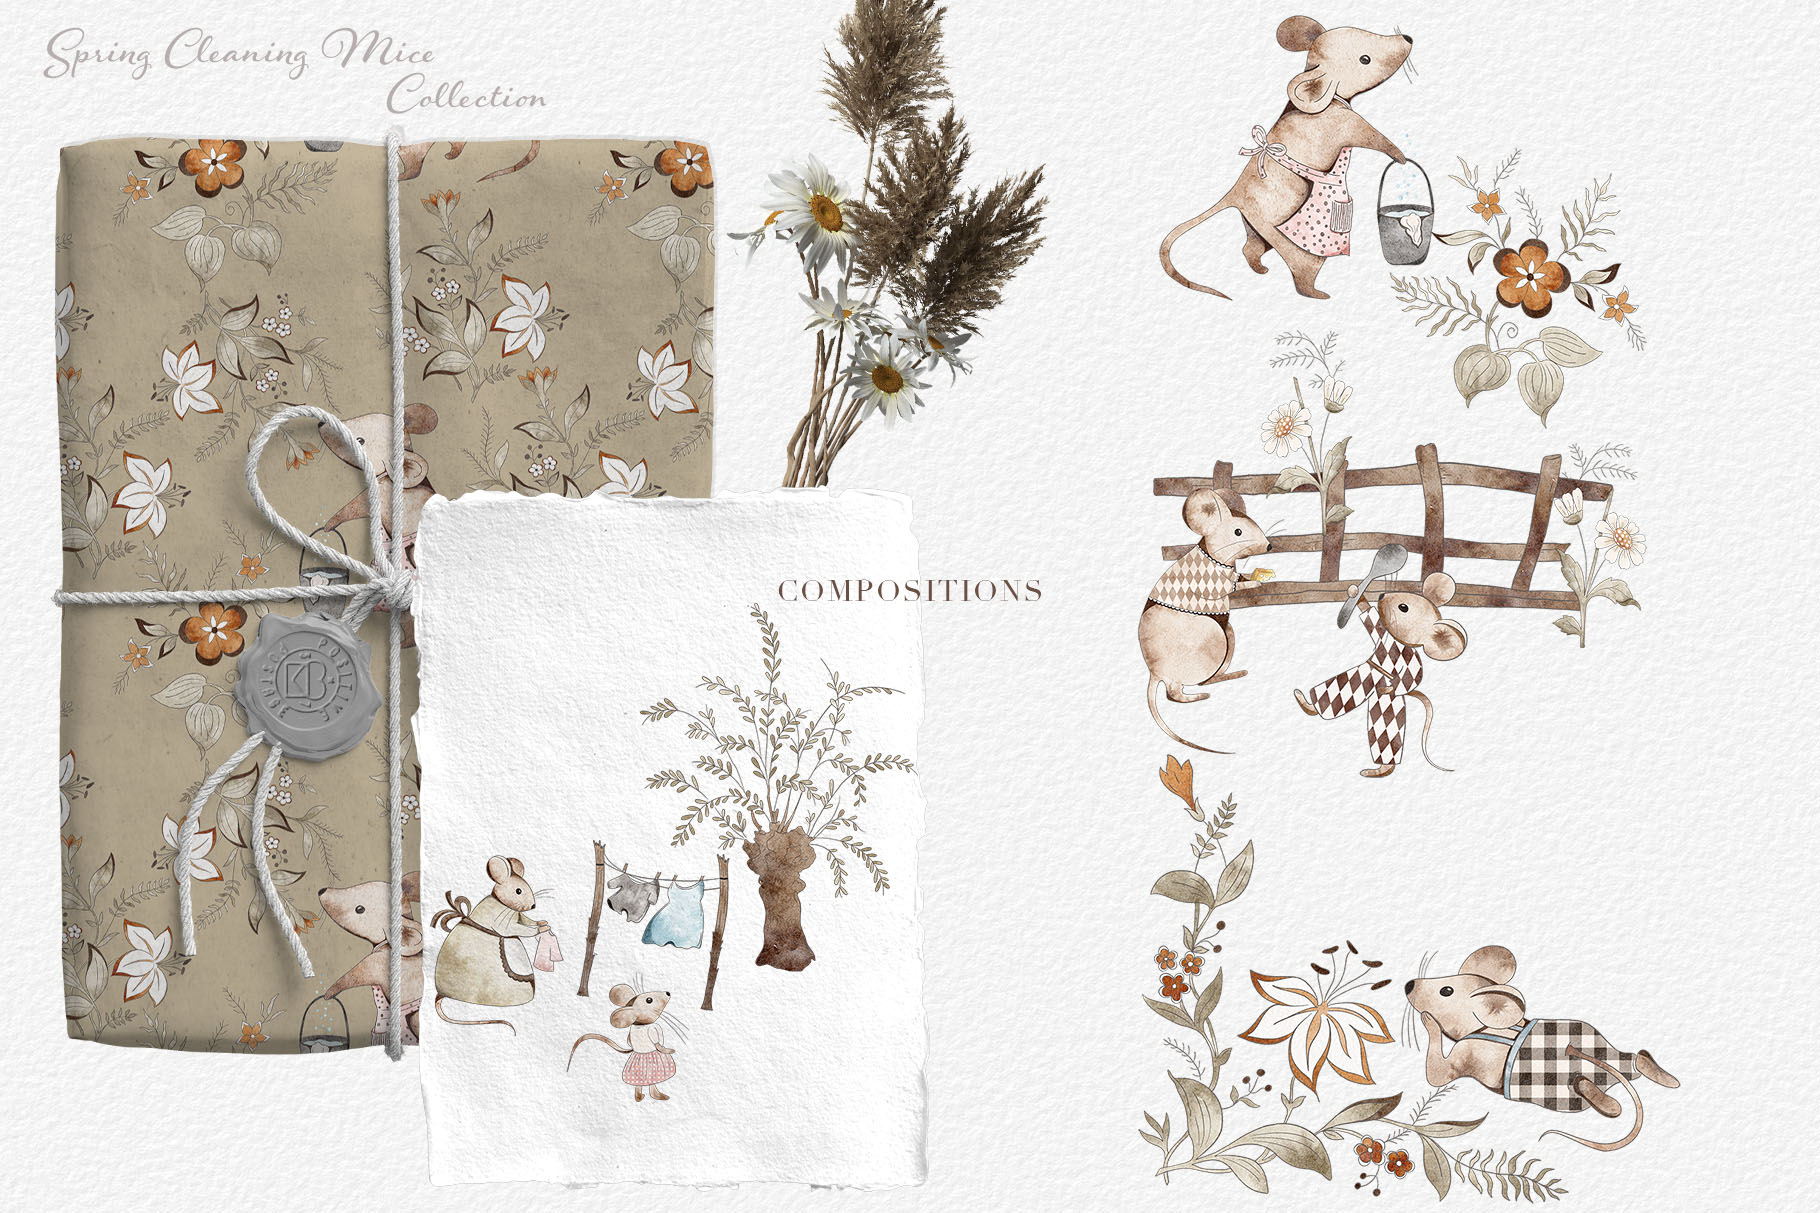 Watercolor Spring Cleaning Cute Mice Nursery Art Collection elements.